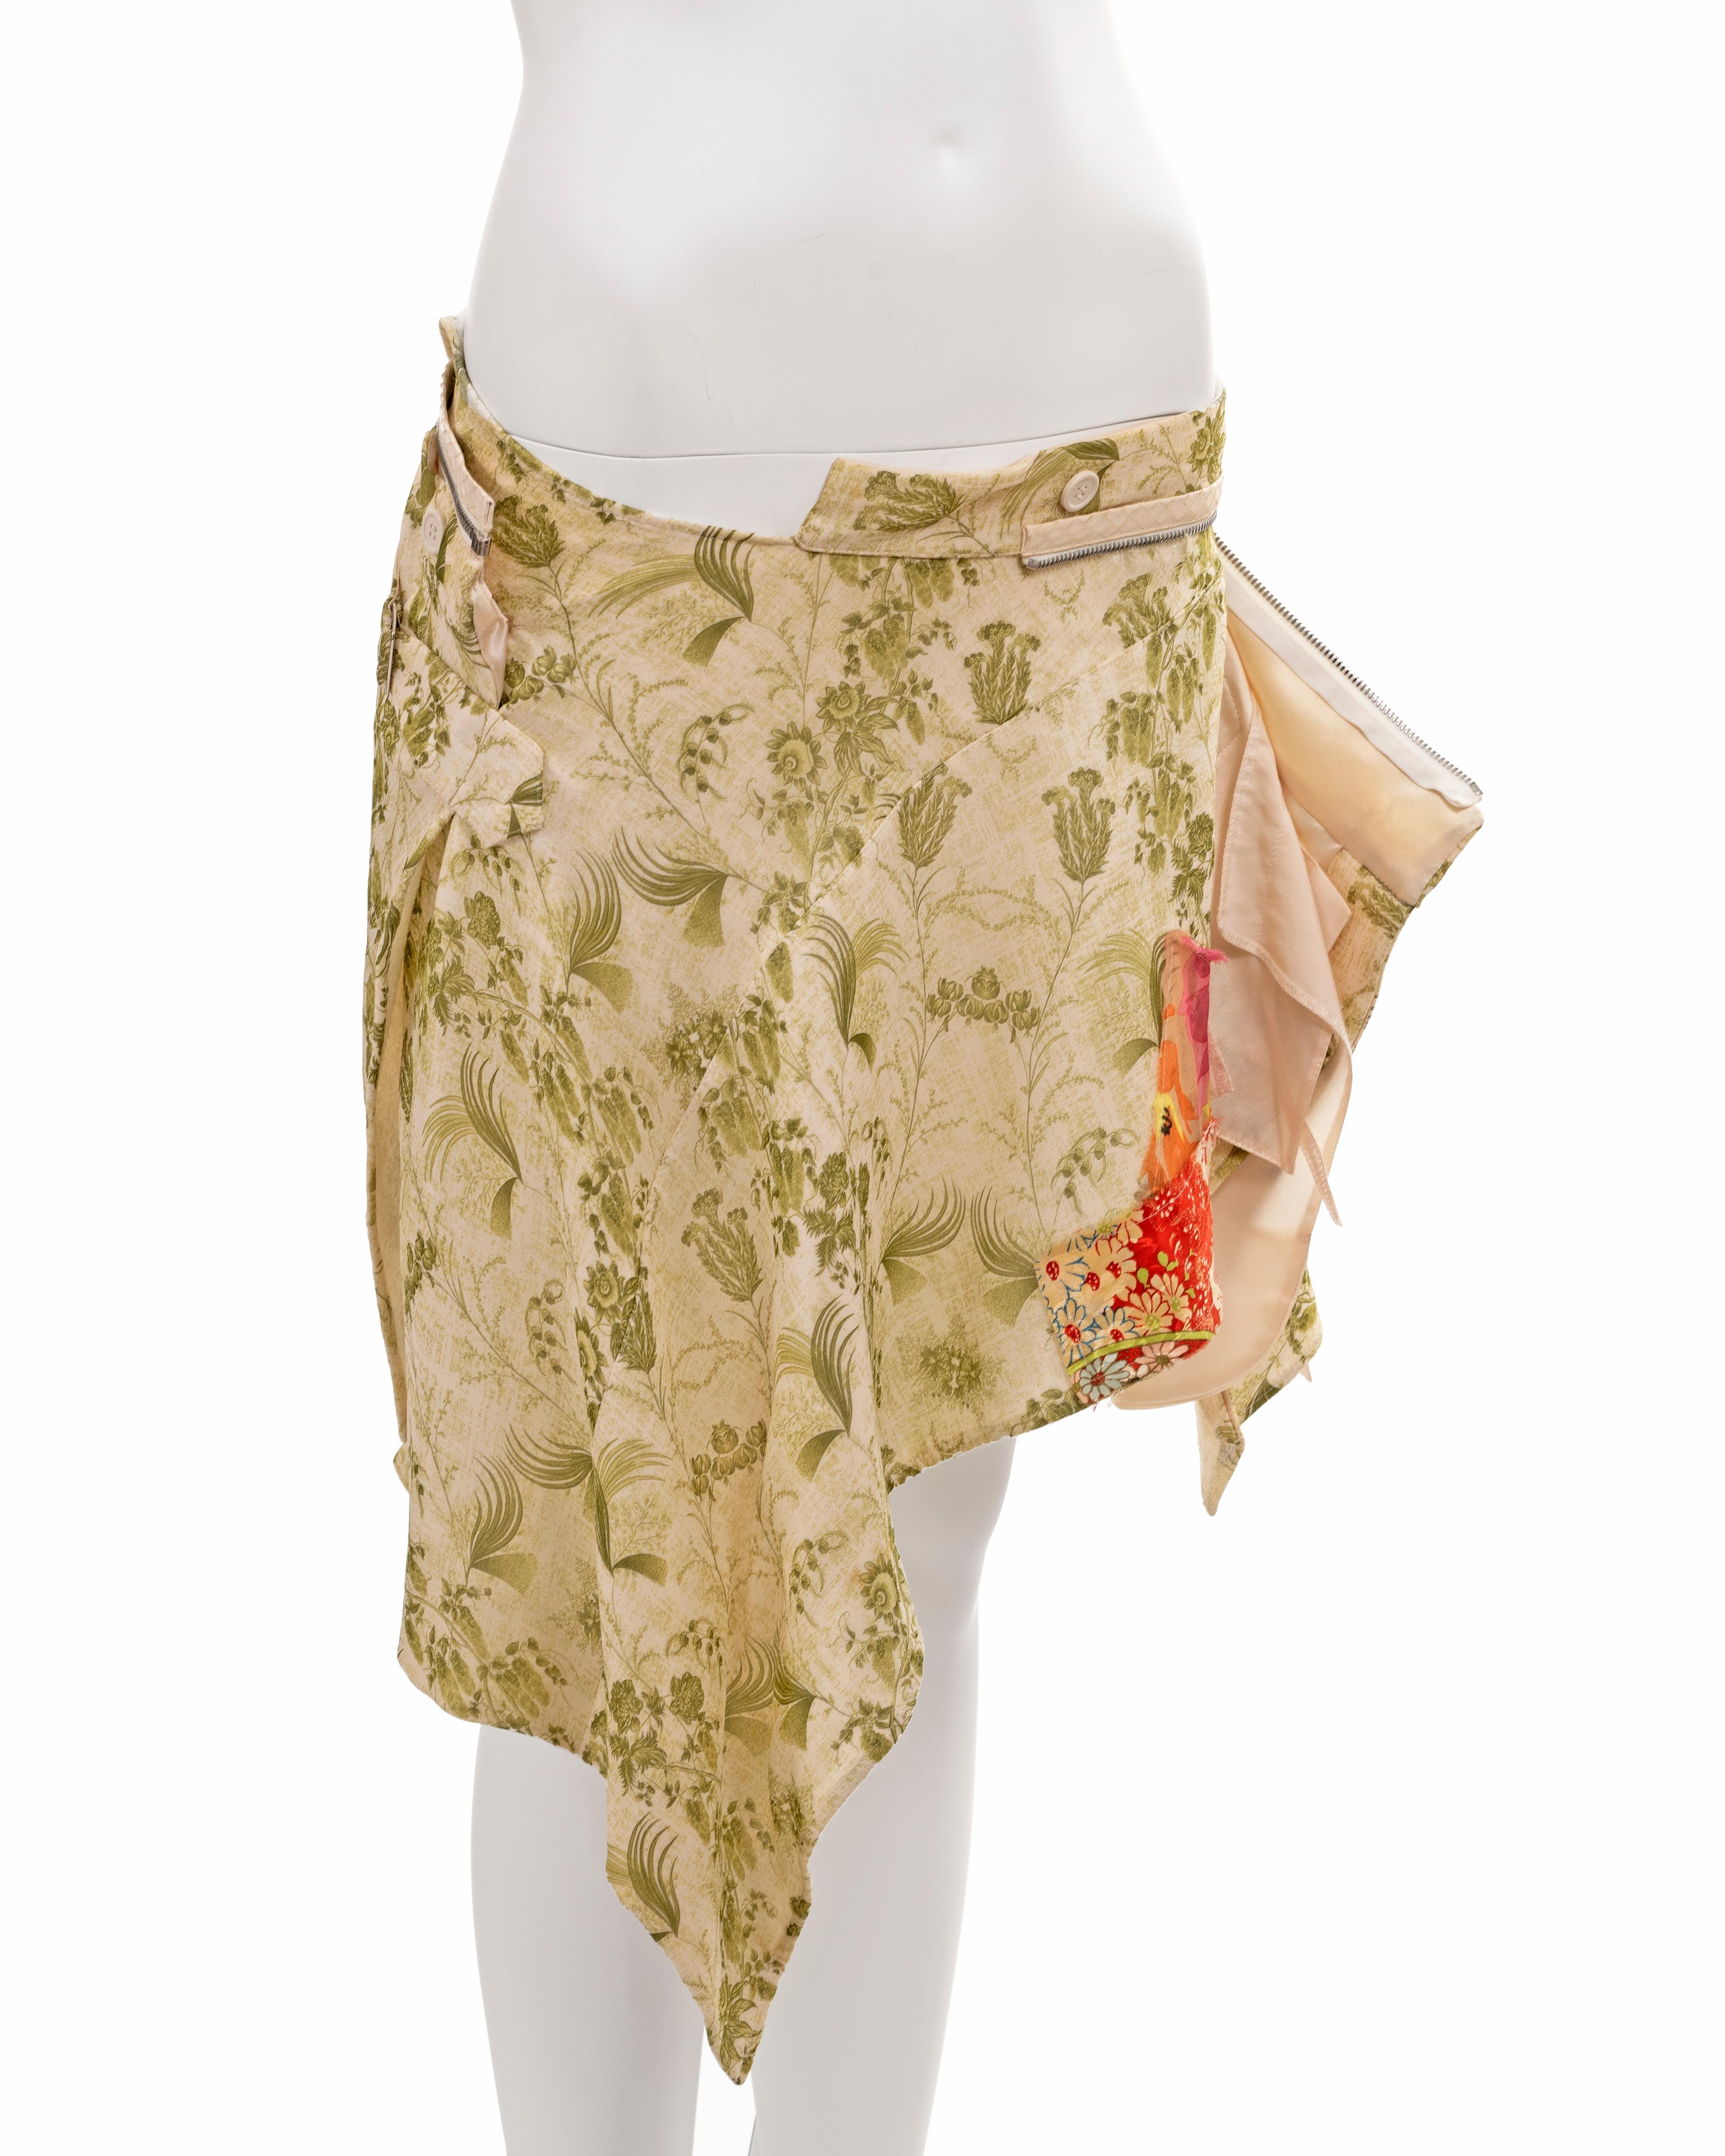 Christian Dior by John Galliano deconstructed floral silk wrap skirt, ss 2001 For Sale 8